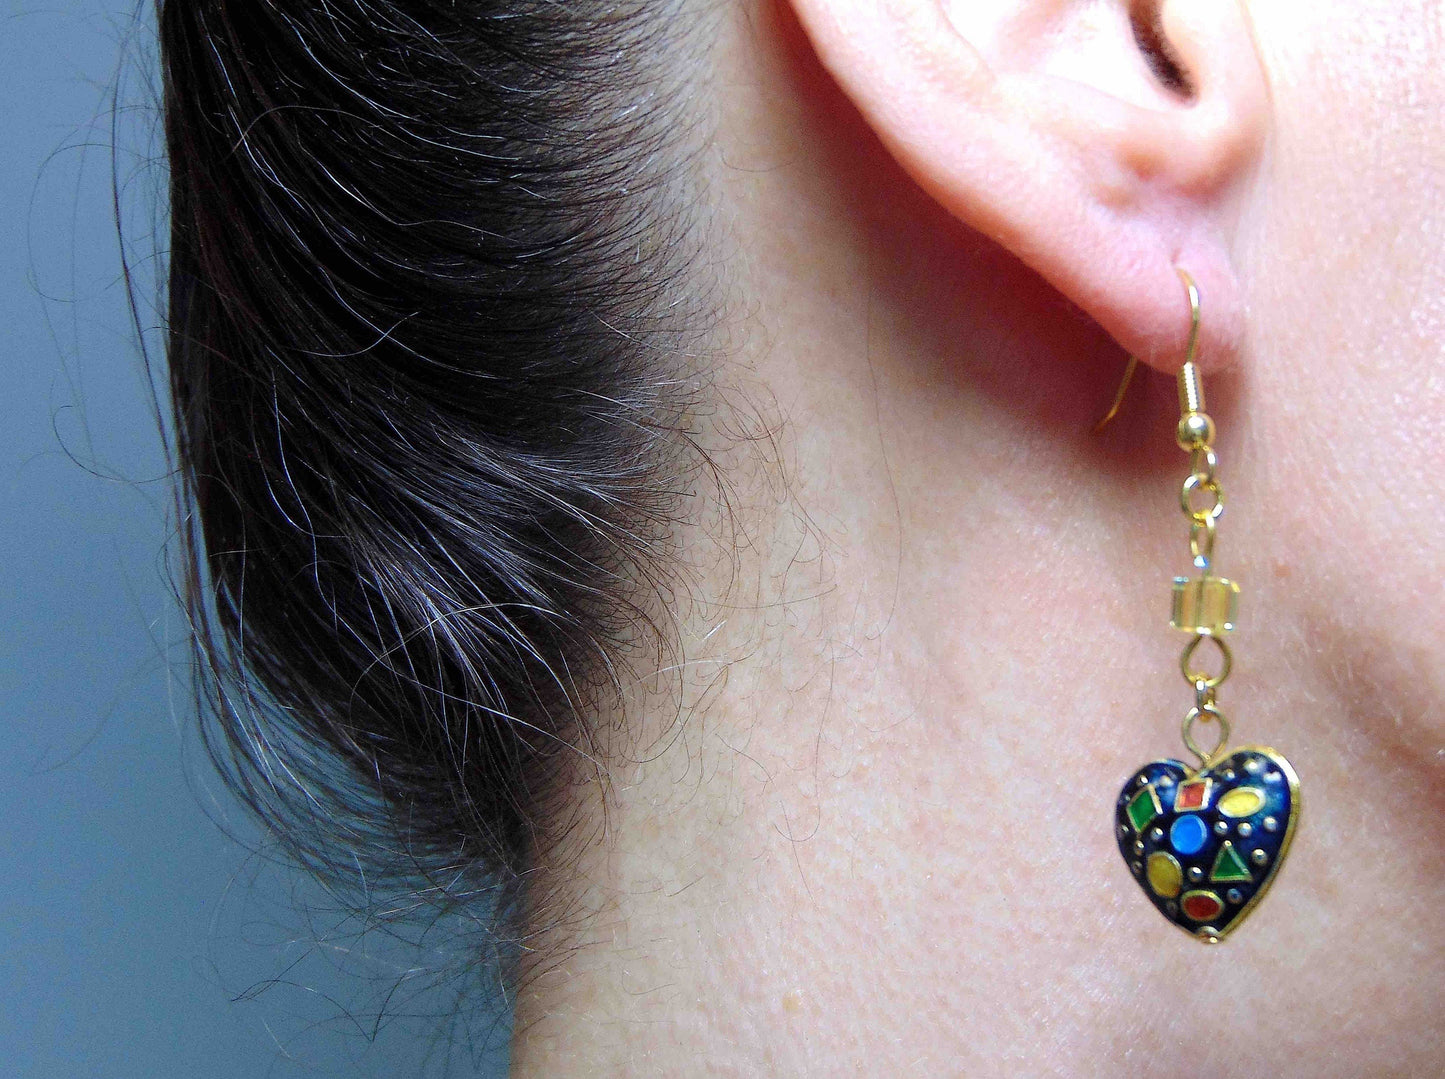 Long earrings with enamelled hearts in 3 colours (red, turquoise, black), geometric patterns, assorted Swarovski crystal cubes, gold-toned stainless steel hooks